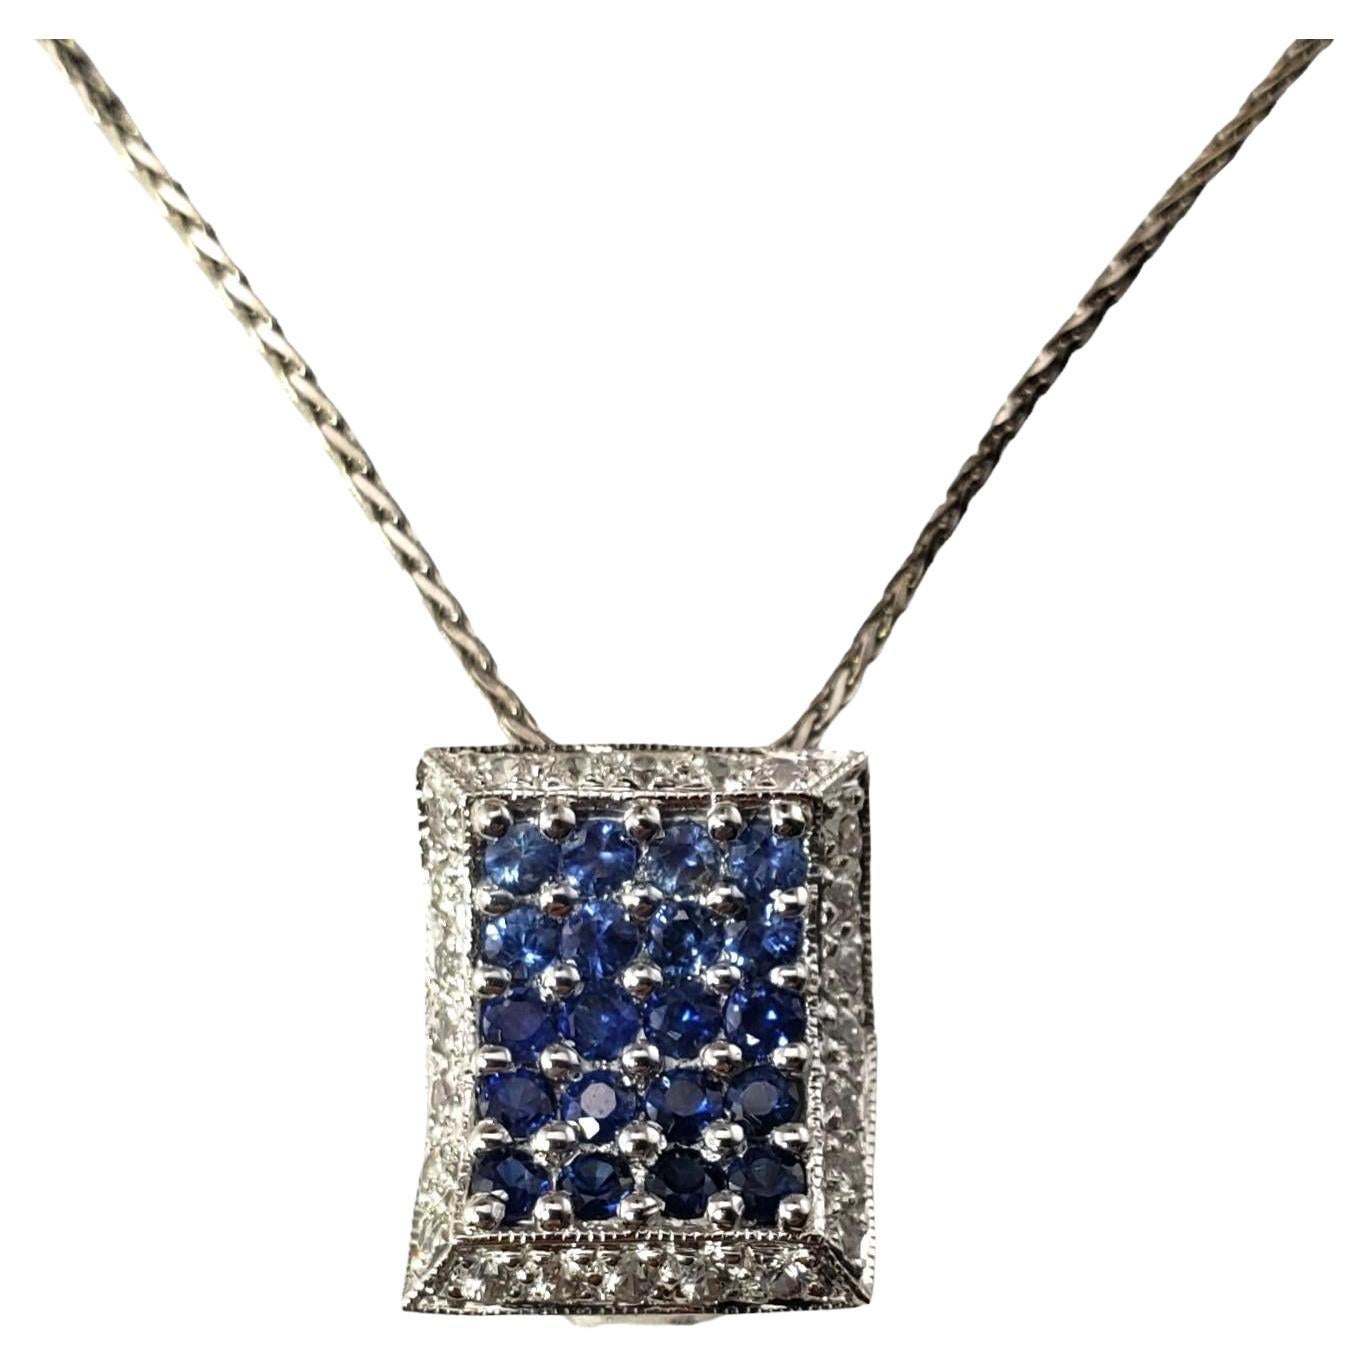  14K WG Blue and White Sapphire Pendant Necklace #15573